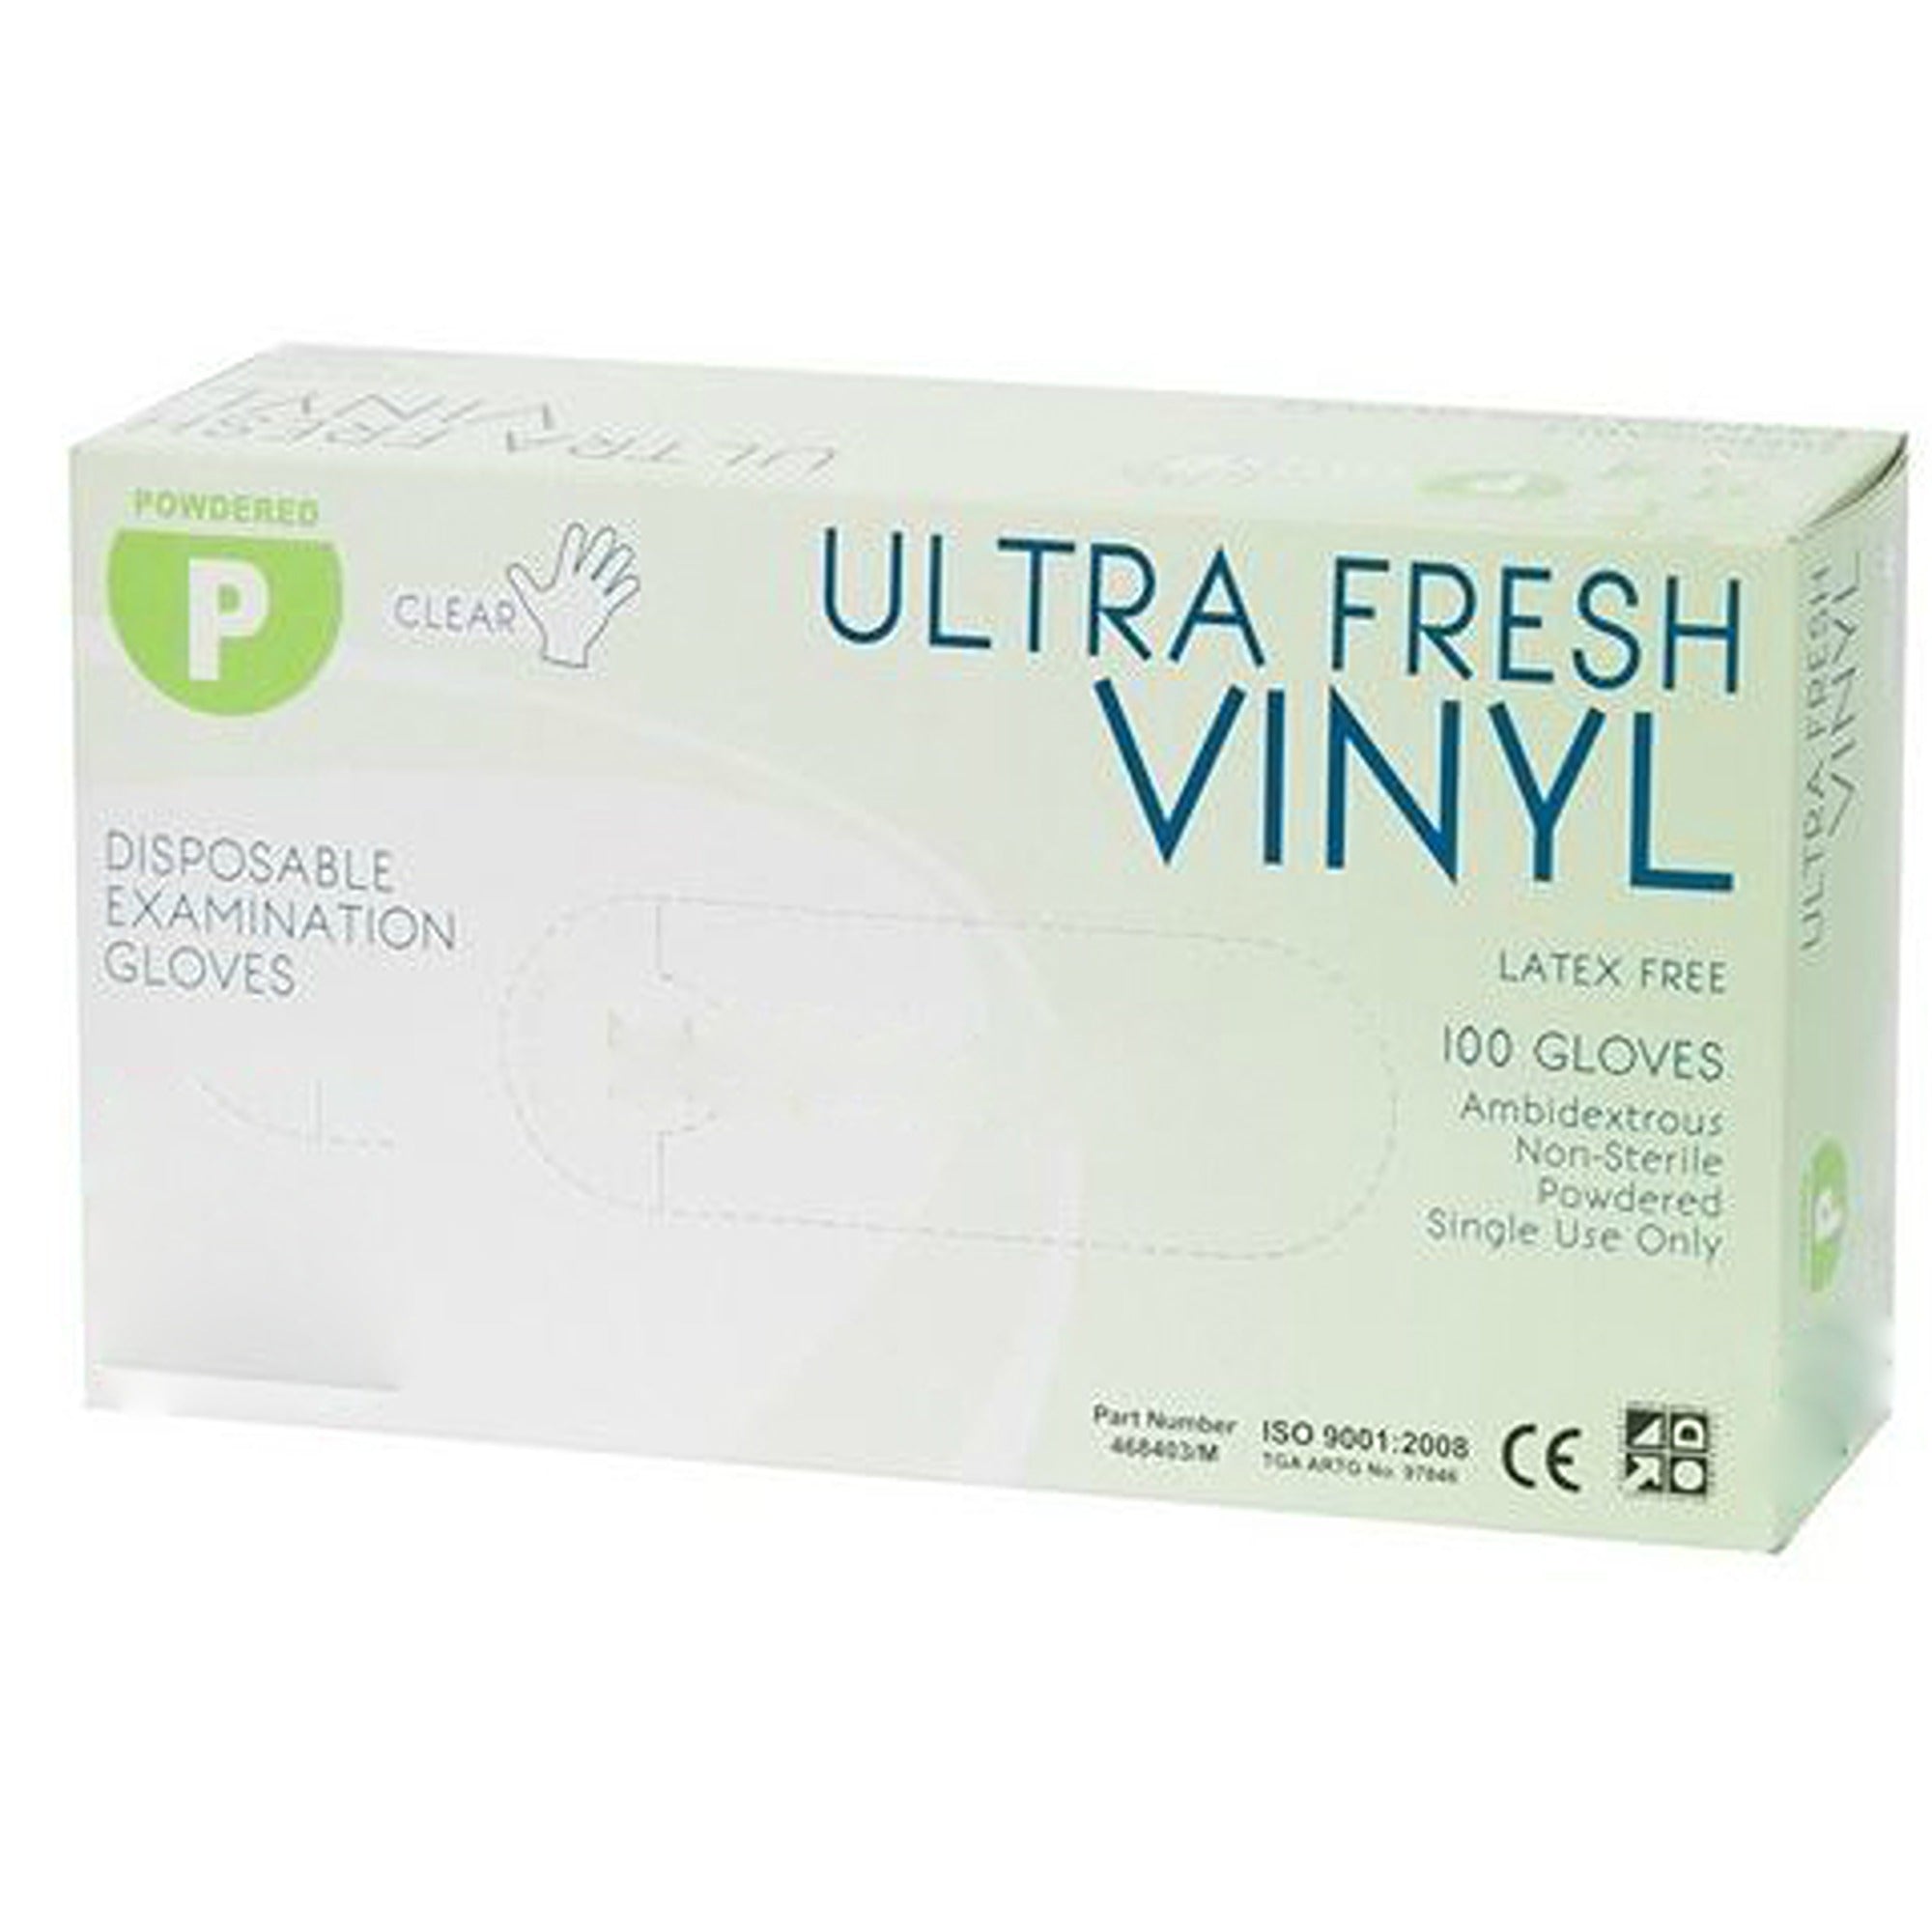 Gloves Ultra Fresh Clear Vinyl P/F Extra Large Box of 100